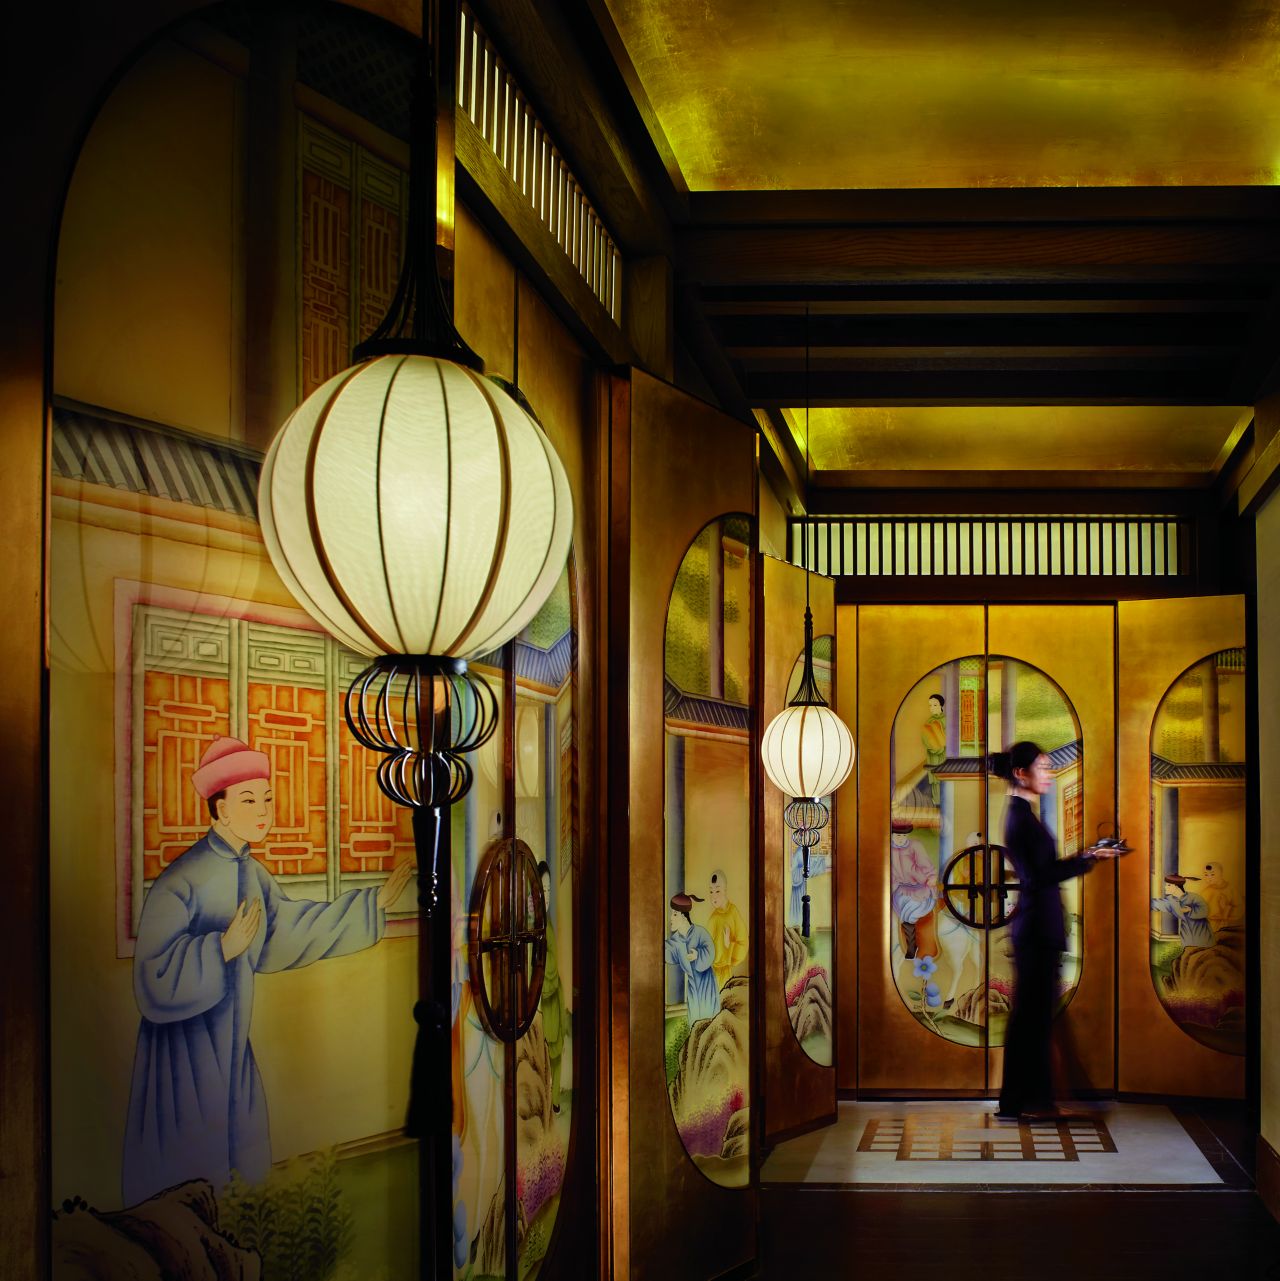 Waitress in a long dress in a hallway painted with traditional Chinese scenes